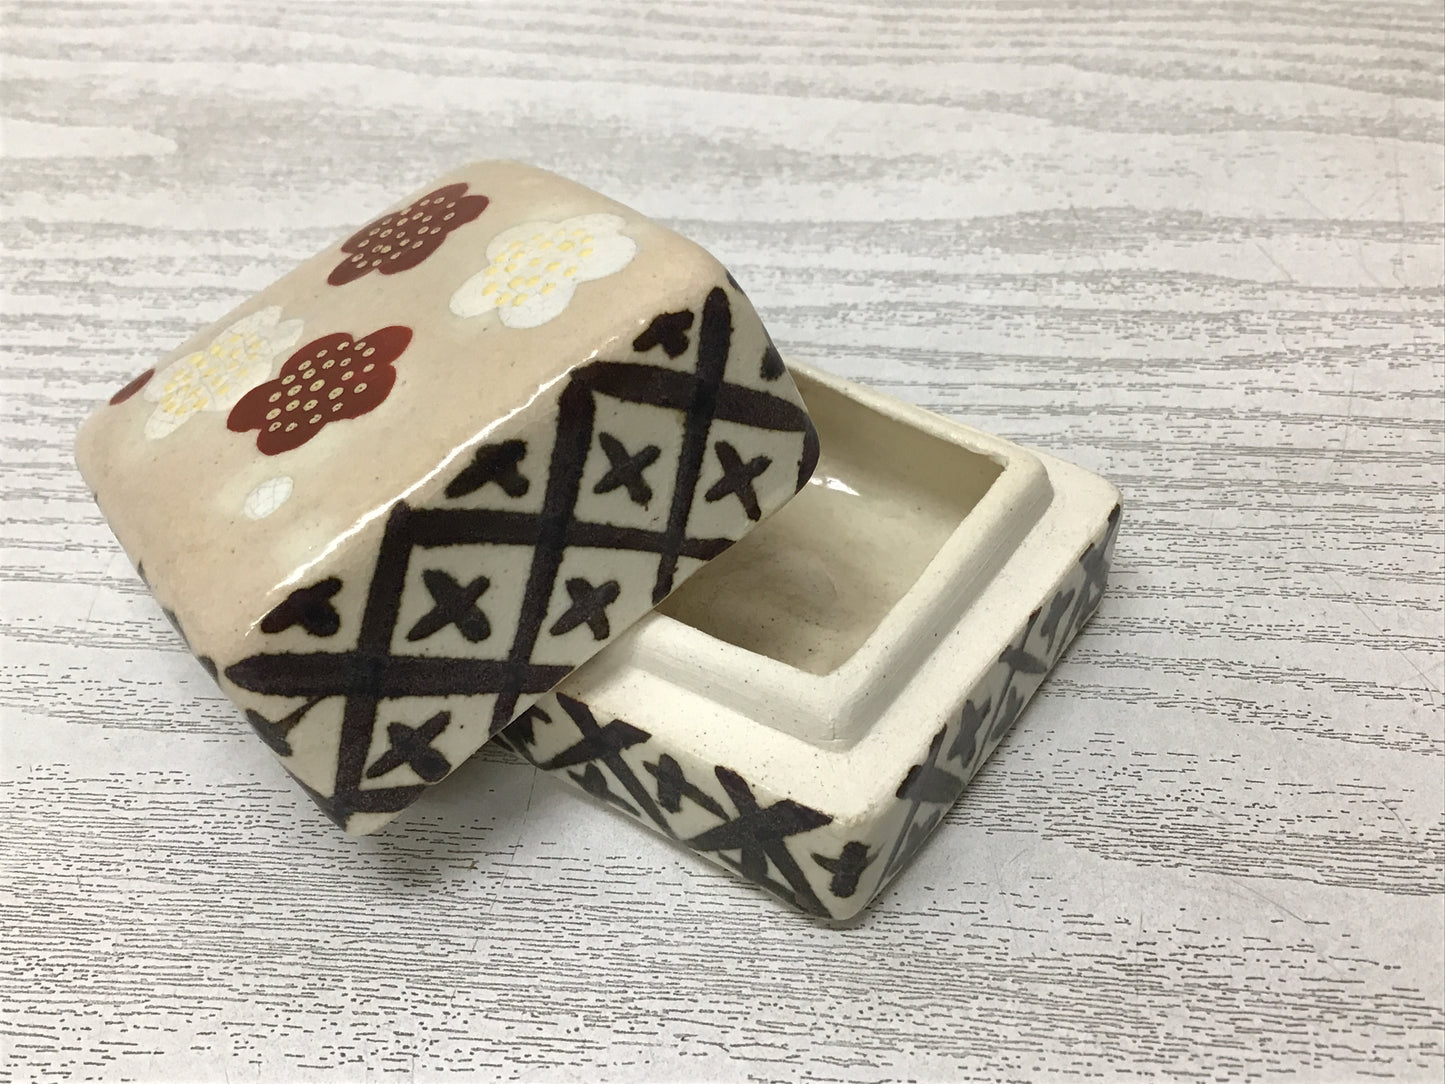 Y2812 BOX Kyo-ware signed Kenzan box Japanese incense container antique pottery